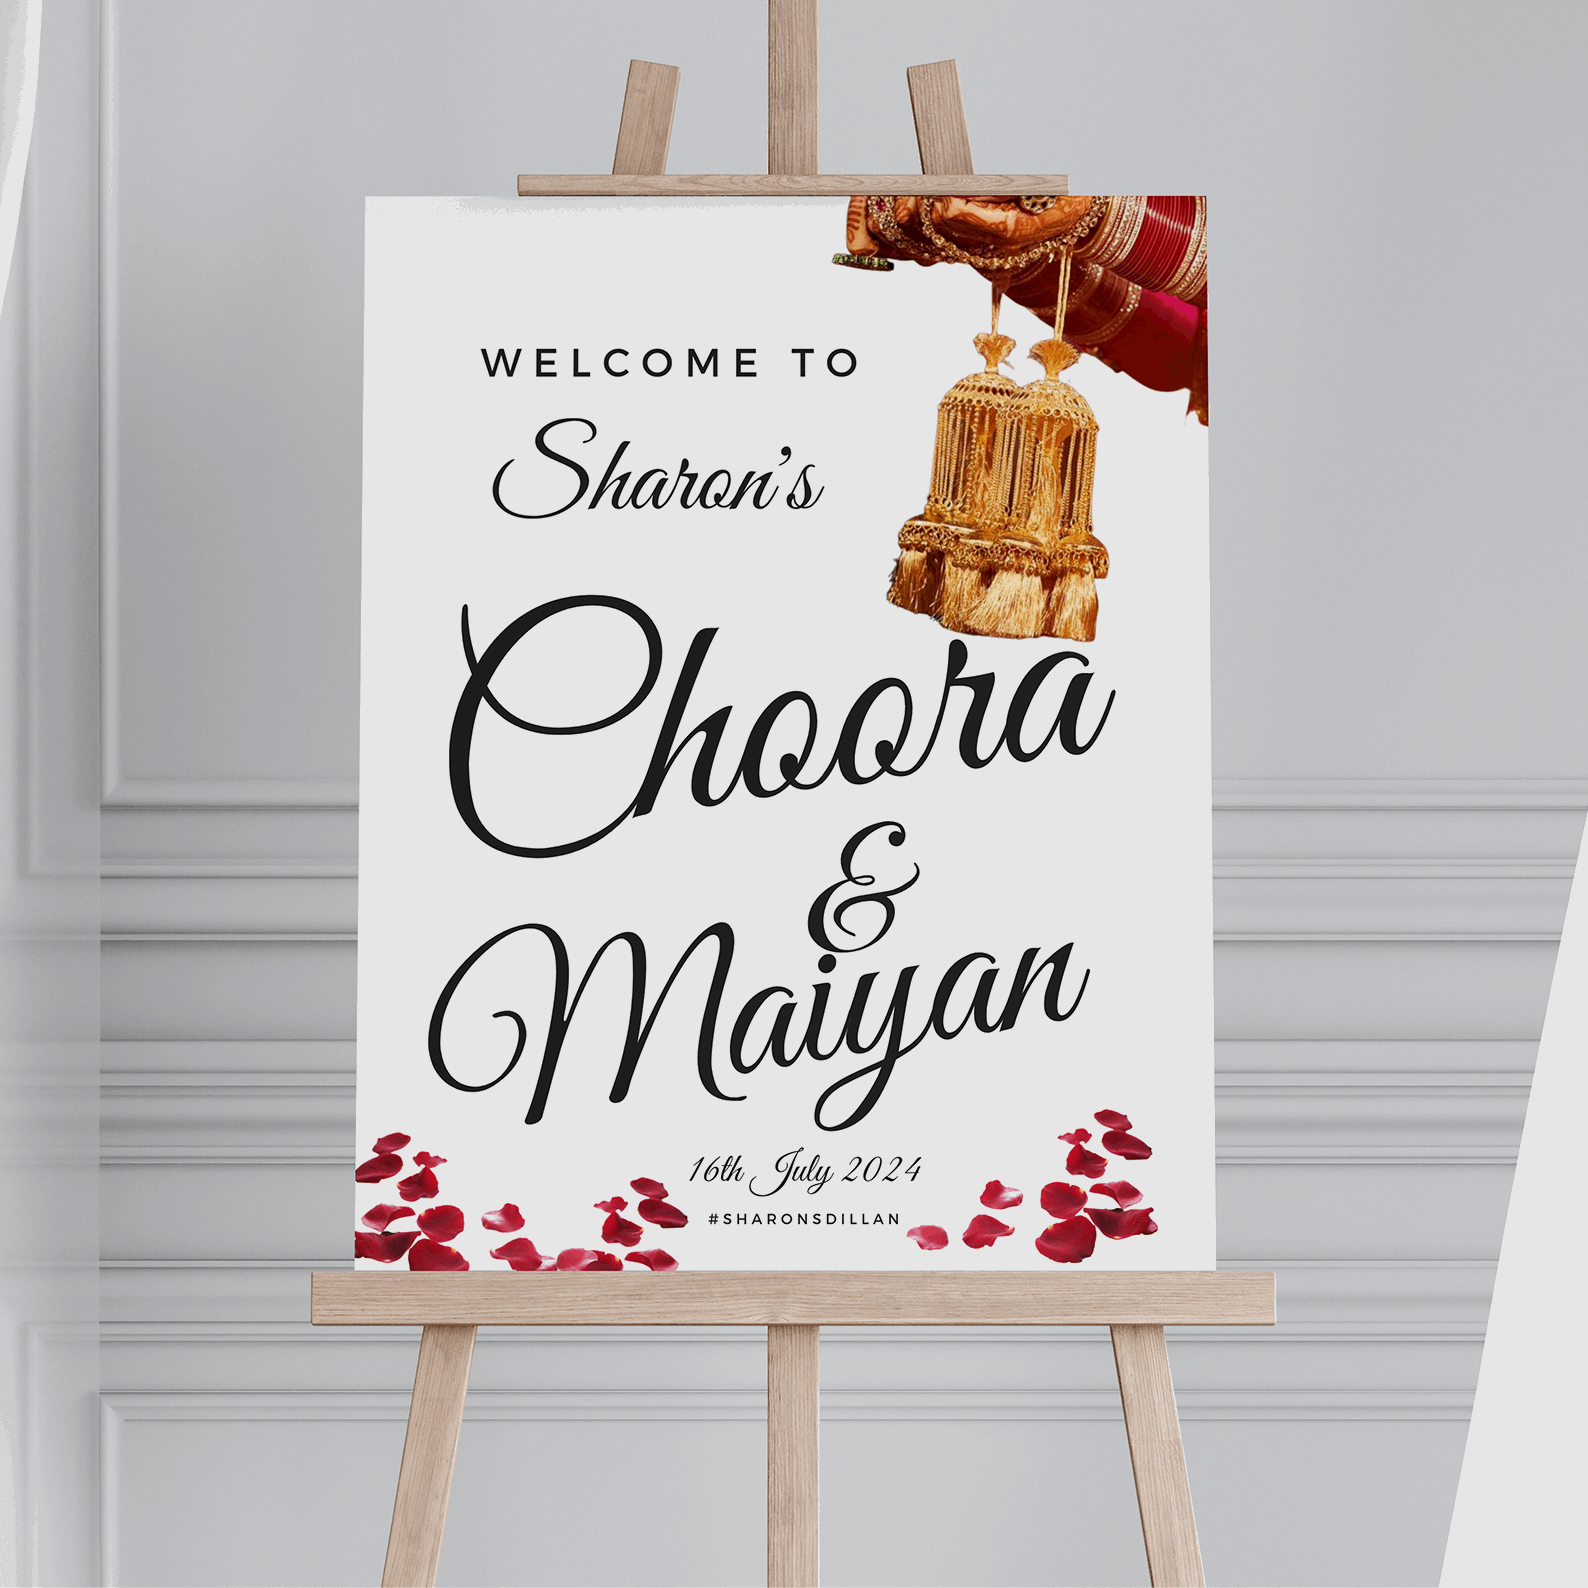 Charming Traditions: Choora Welcome Sign